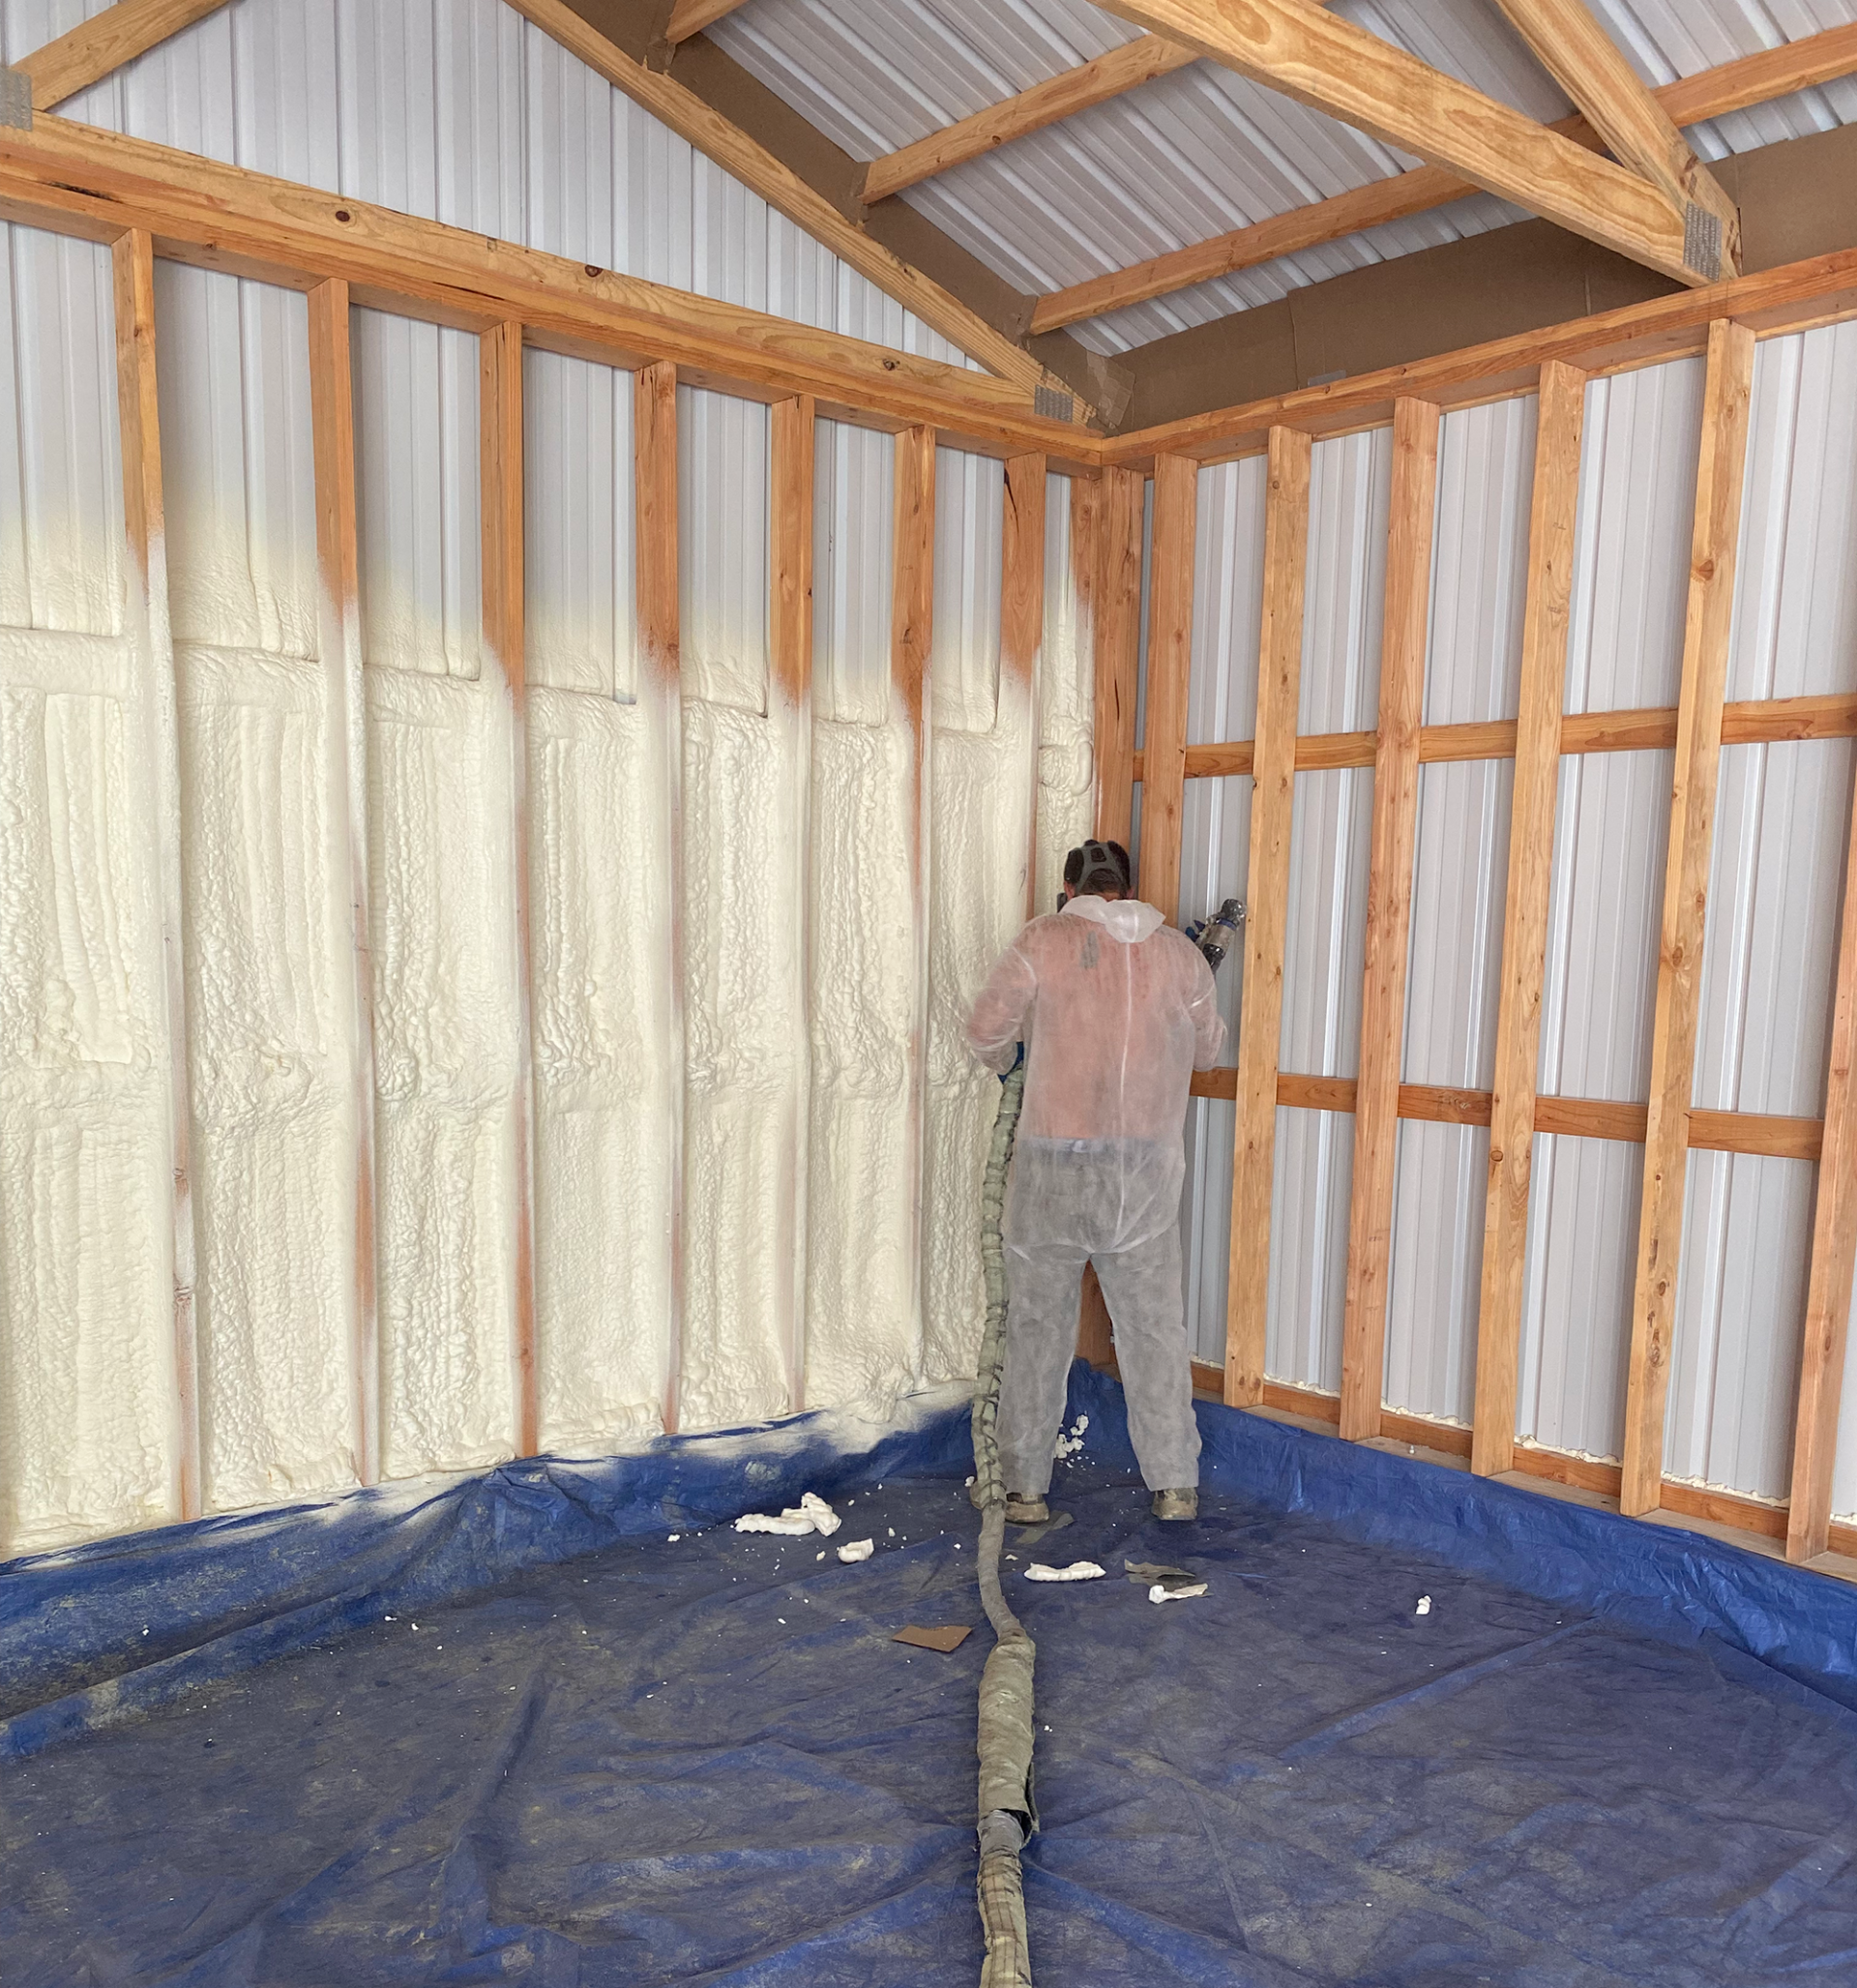 Get Quality Commercial Insulation in Columbia, MO From DK Spray Foam & Insulation